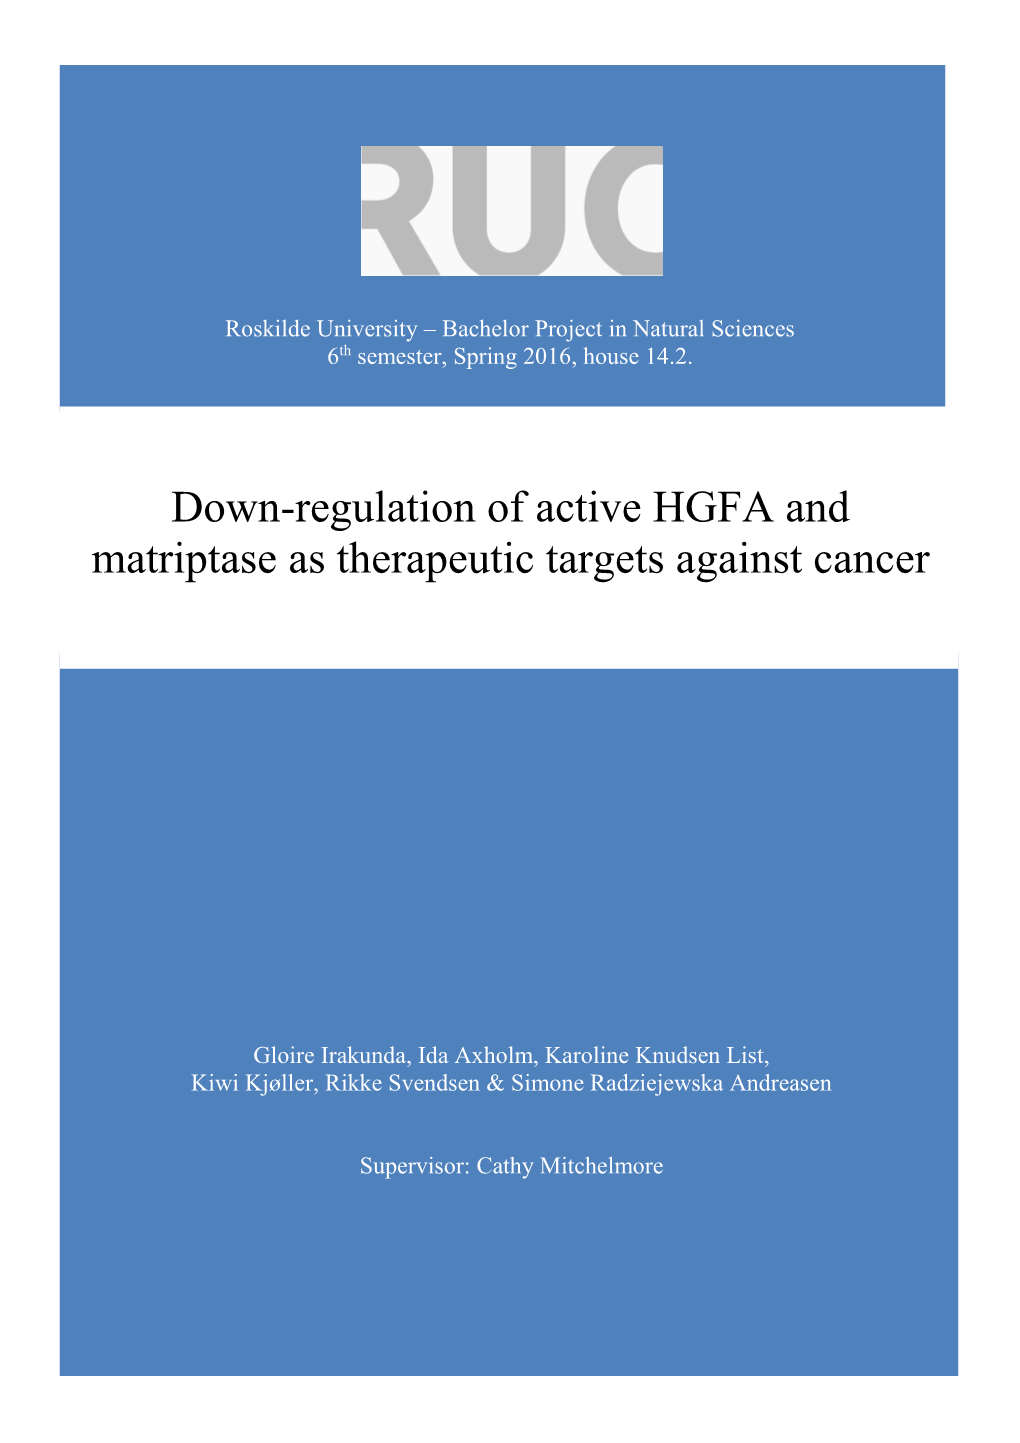 Down-Regulation of Active HGFA and Matriptase As Therapeutic Targets Against Cancer